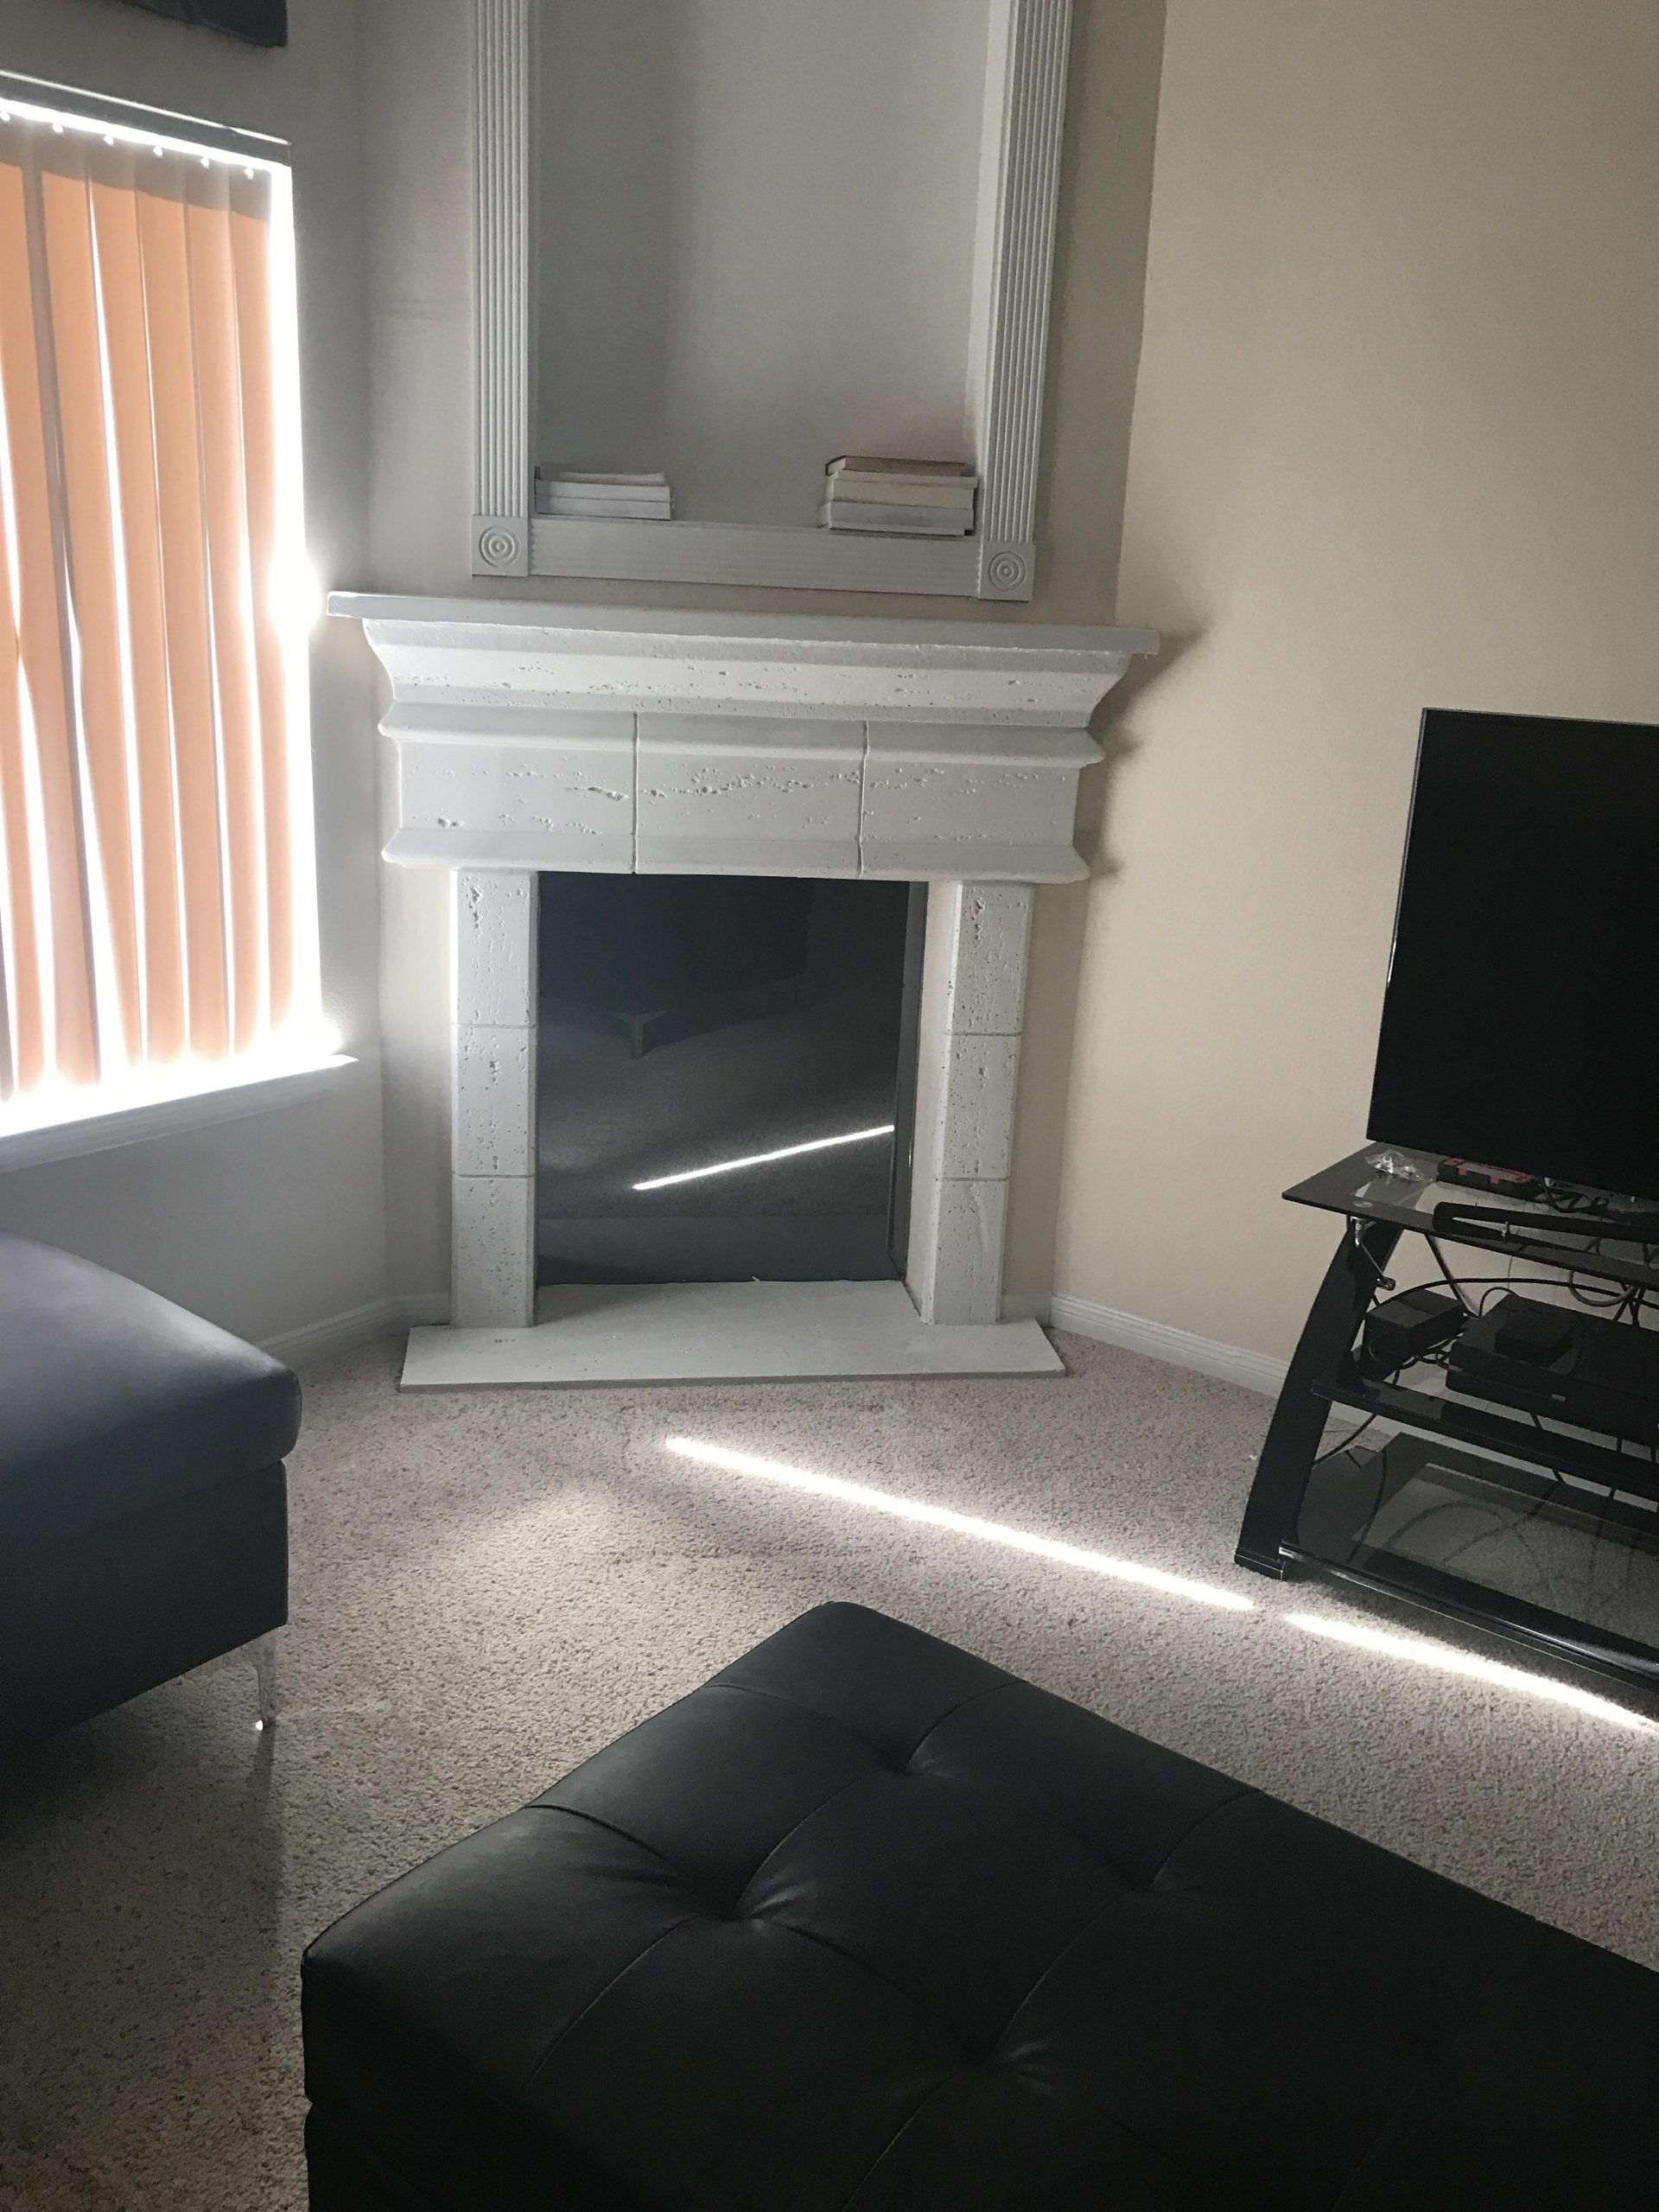 Electric Fireplace with Bookshelf Beautiful What Should I Do with This Fake Fireplace Shelf In My